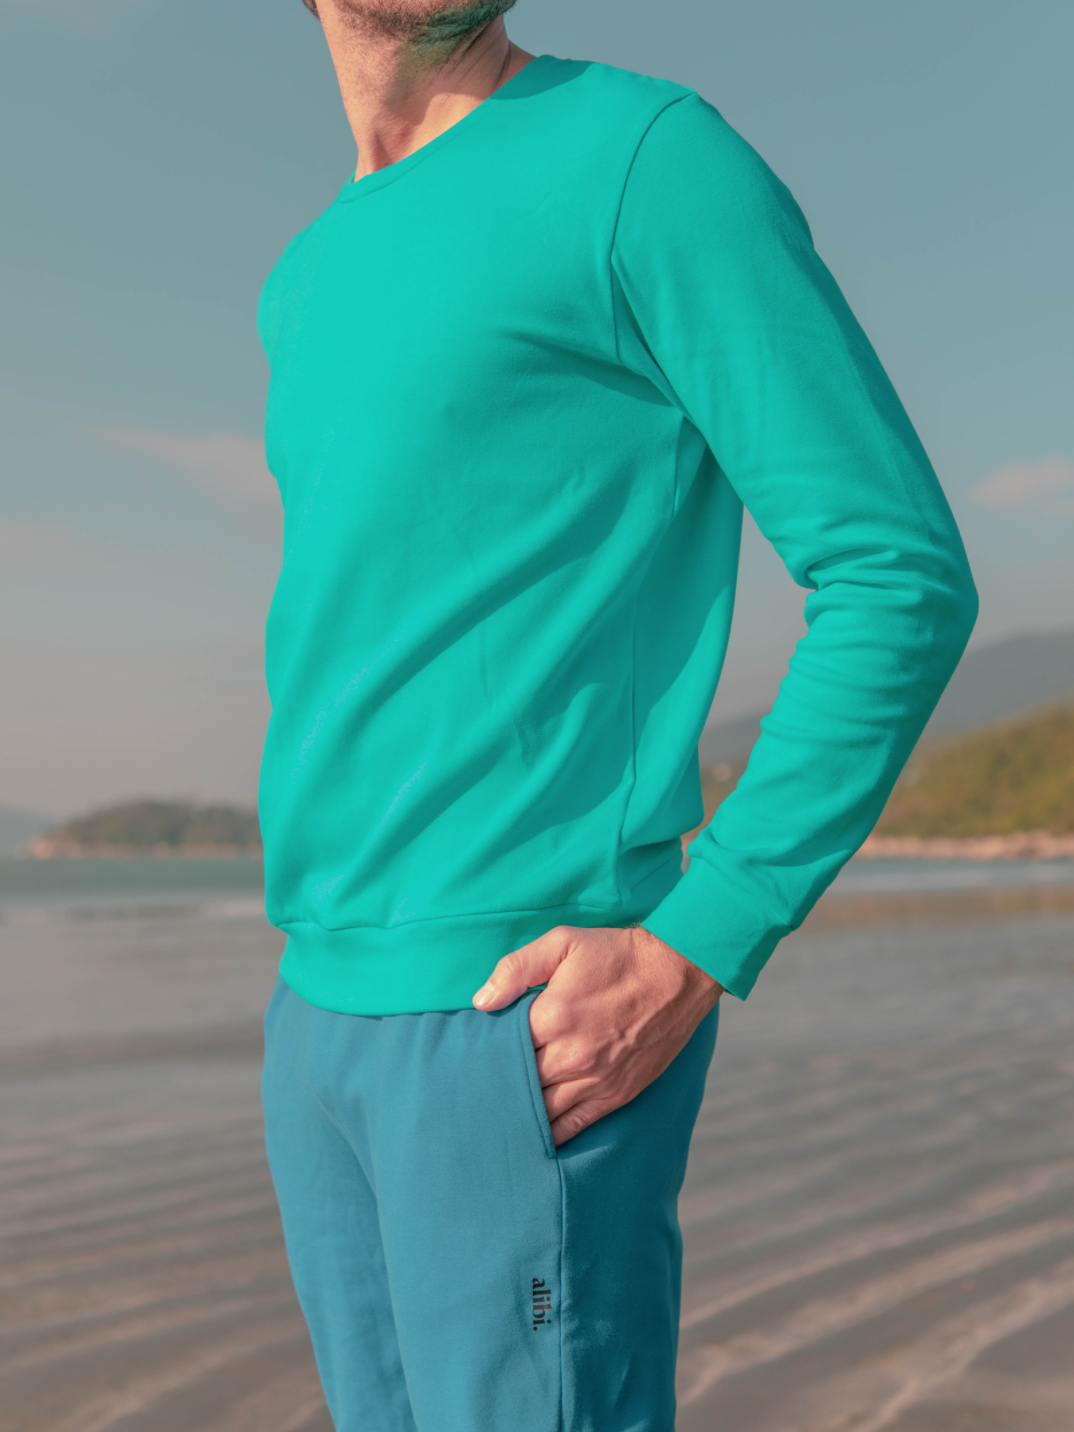 blue sweatshirt that's water-resistant, bacterially-defensive and ecologically-sustainable.